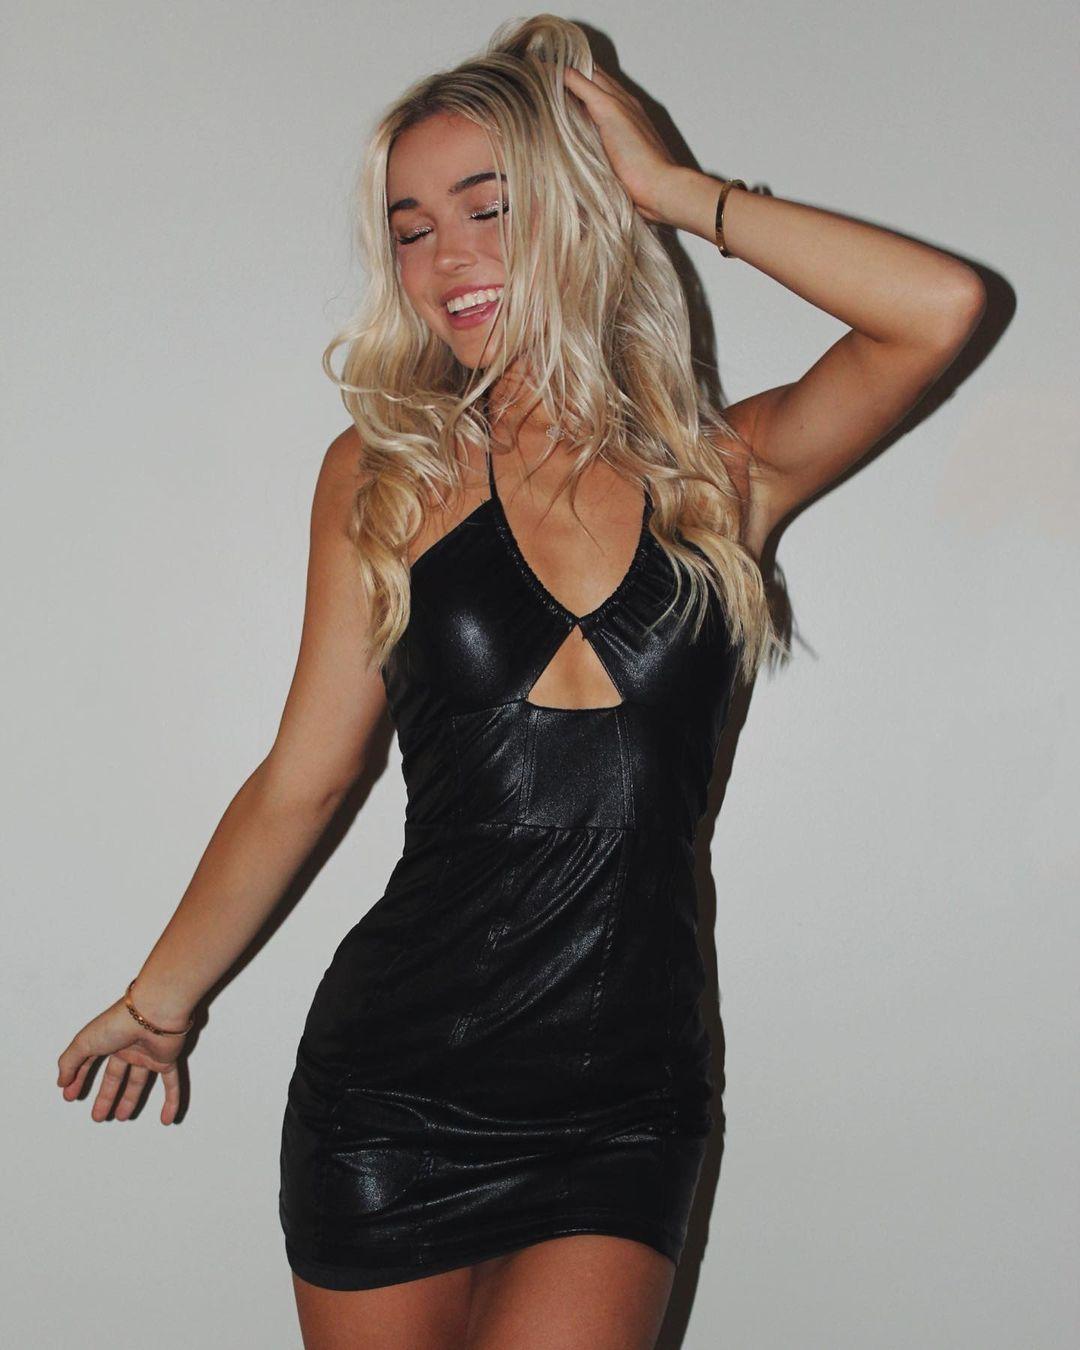 Olivia Dunne poses in her black leather dress.